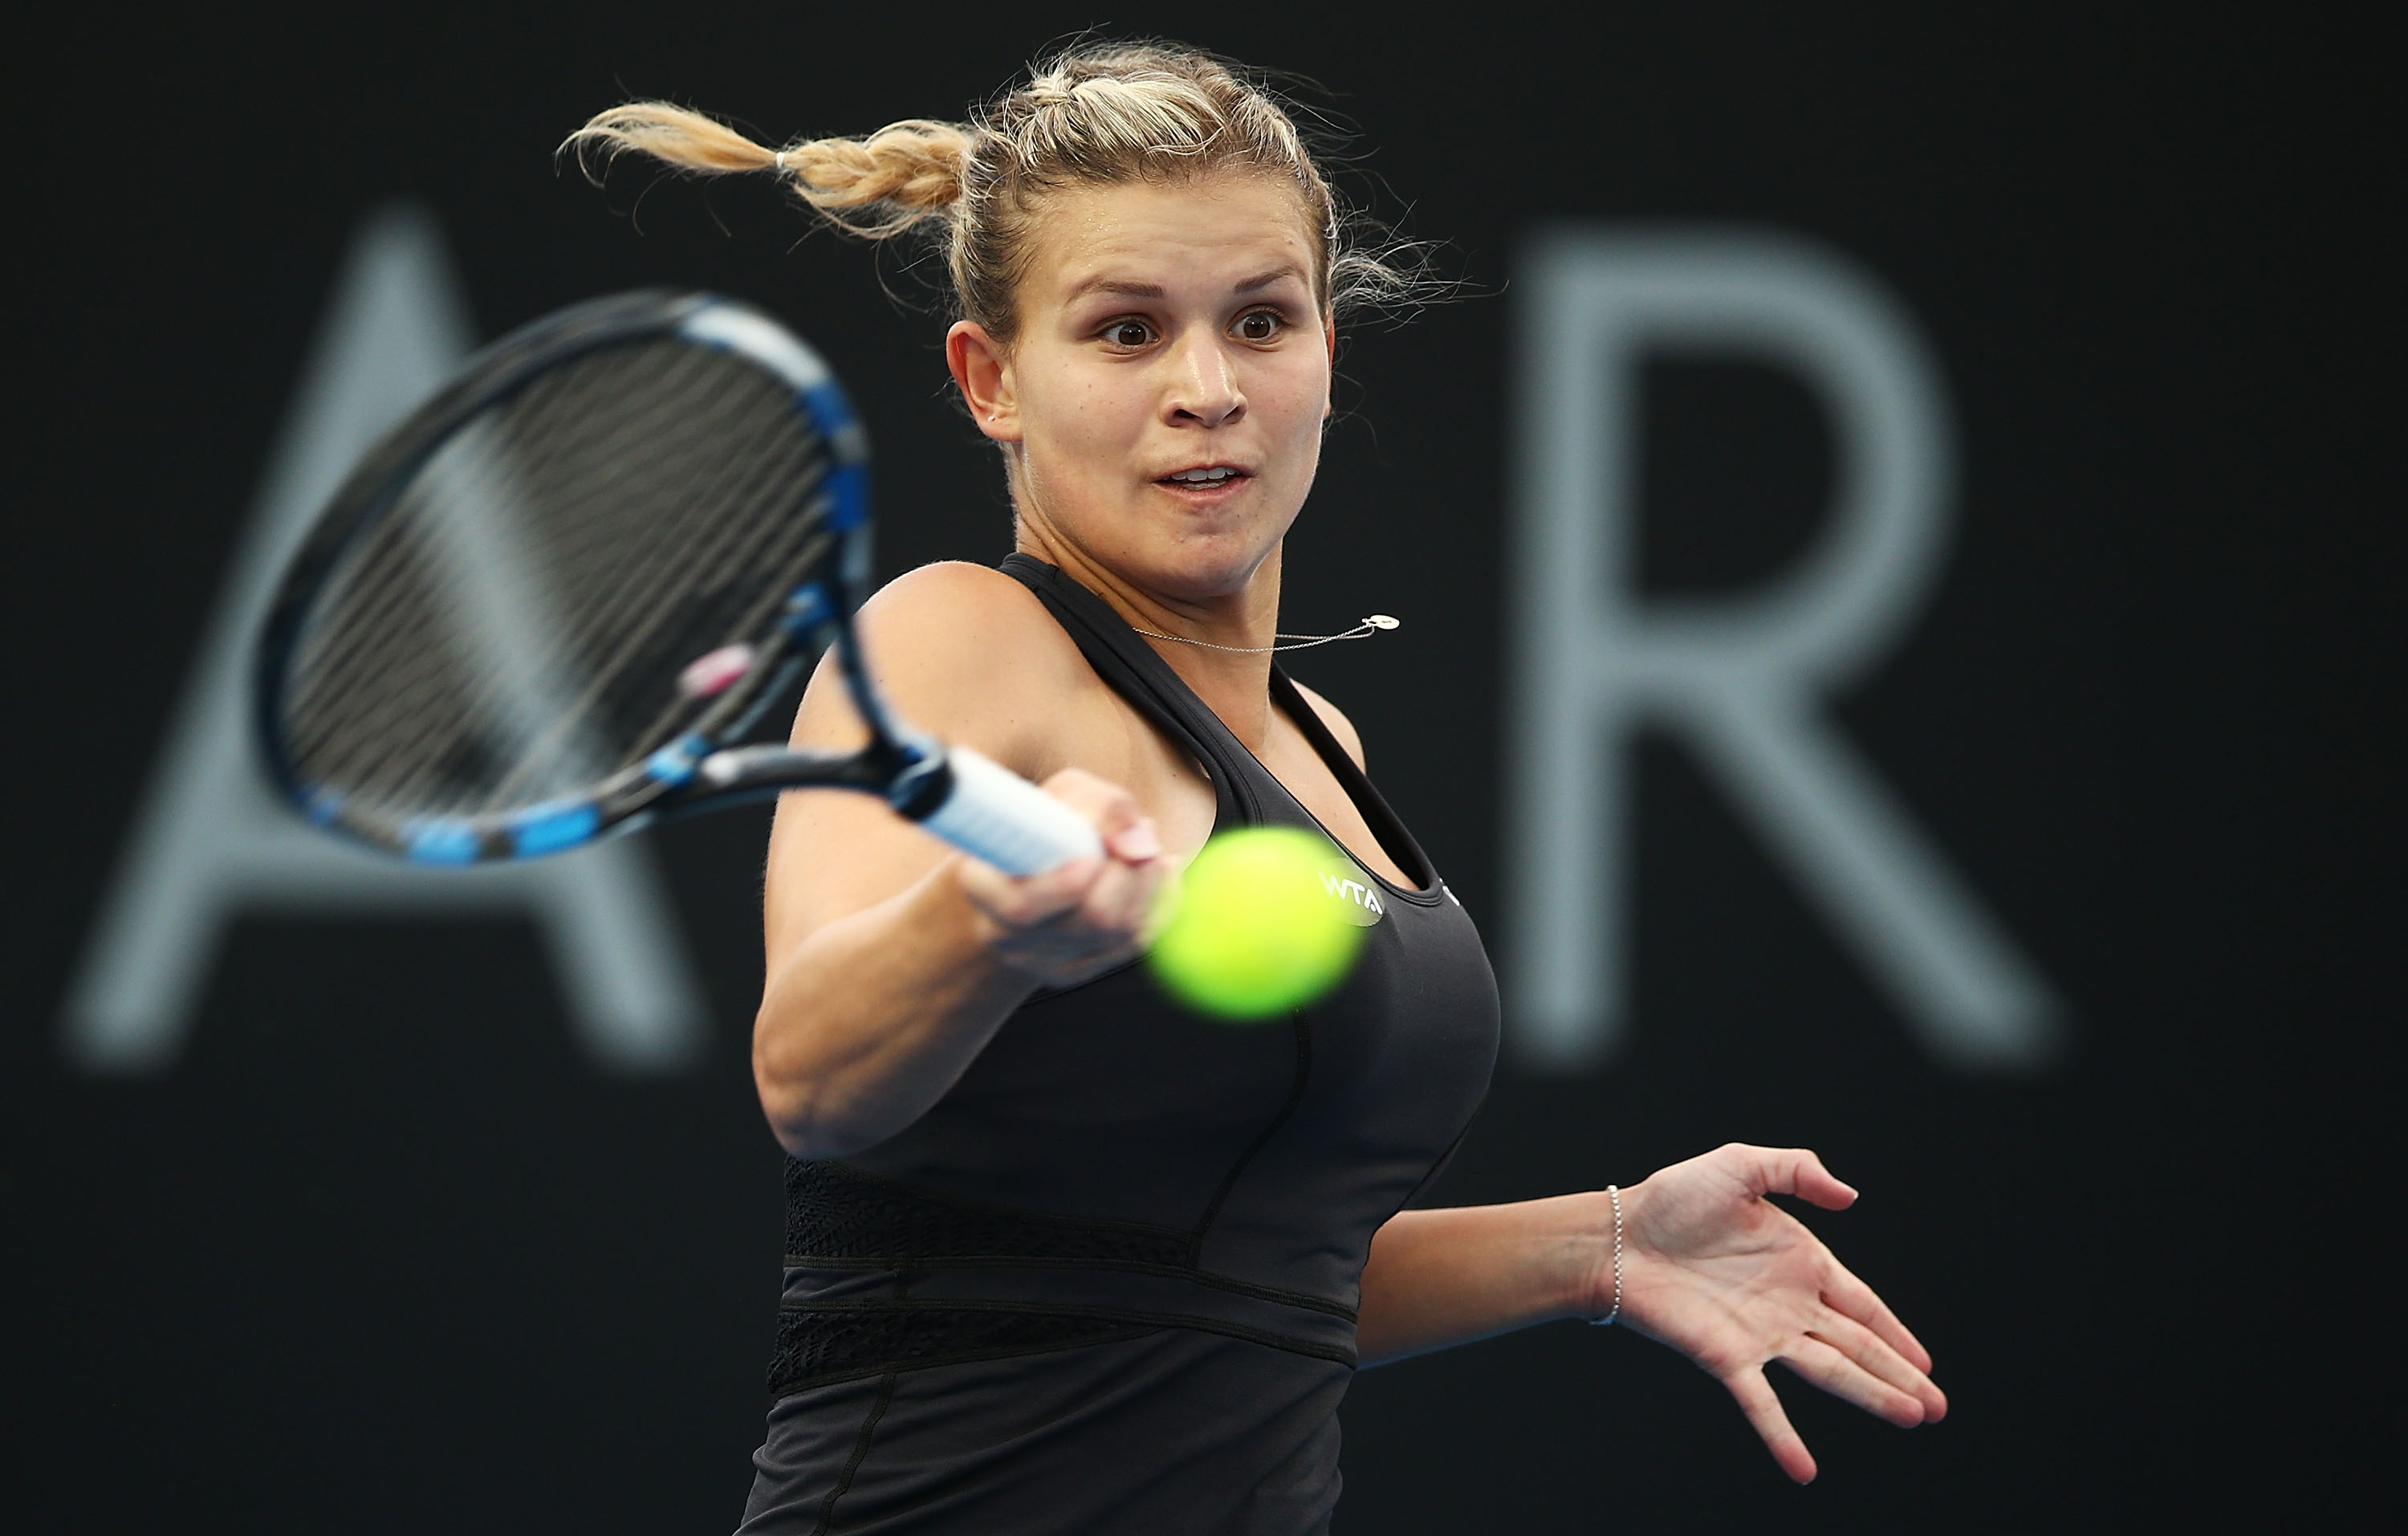 BIG WIN: Croatian Jana Fett lines up a forehand as she qualifies for her first WTA quarterfinal; Getty Images